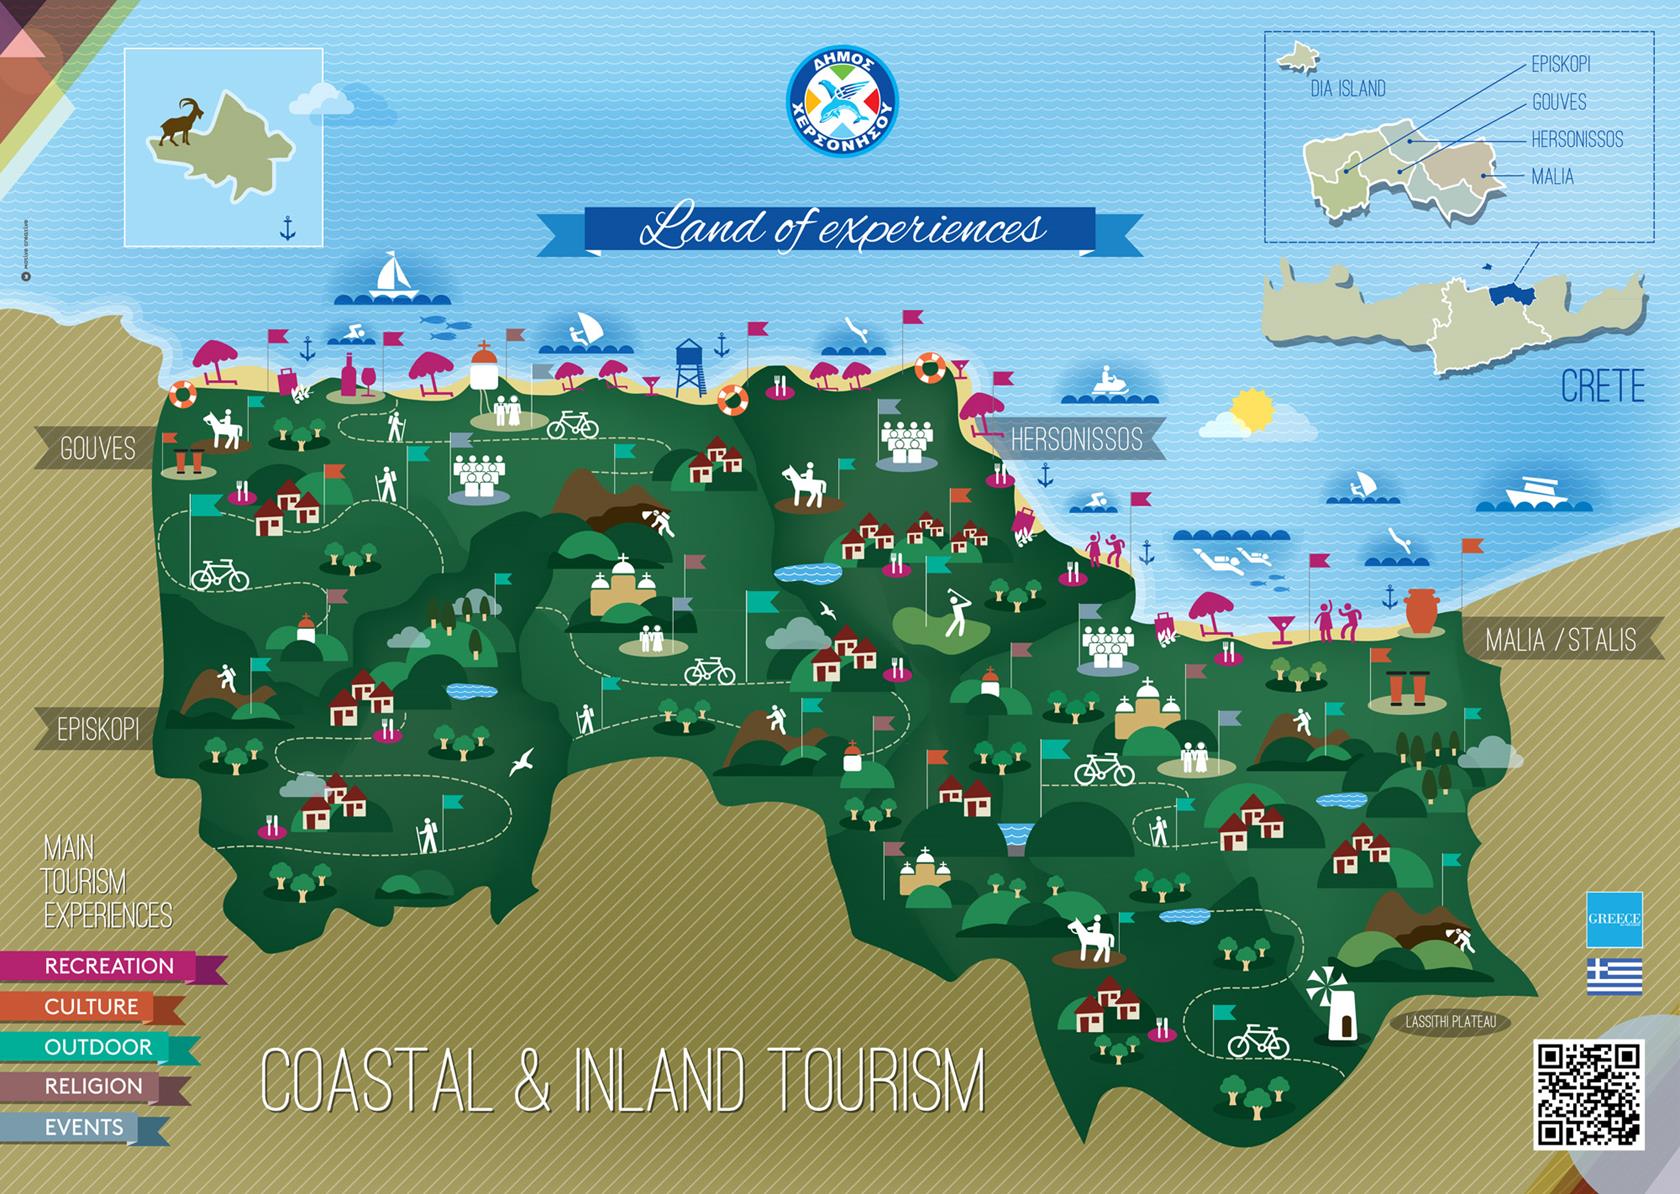 EXPERIENCES MAP